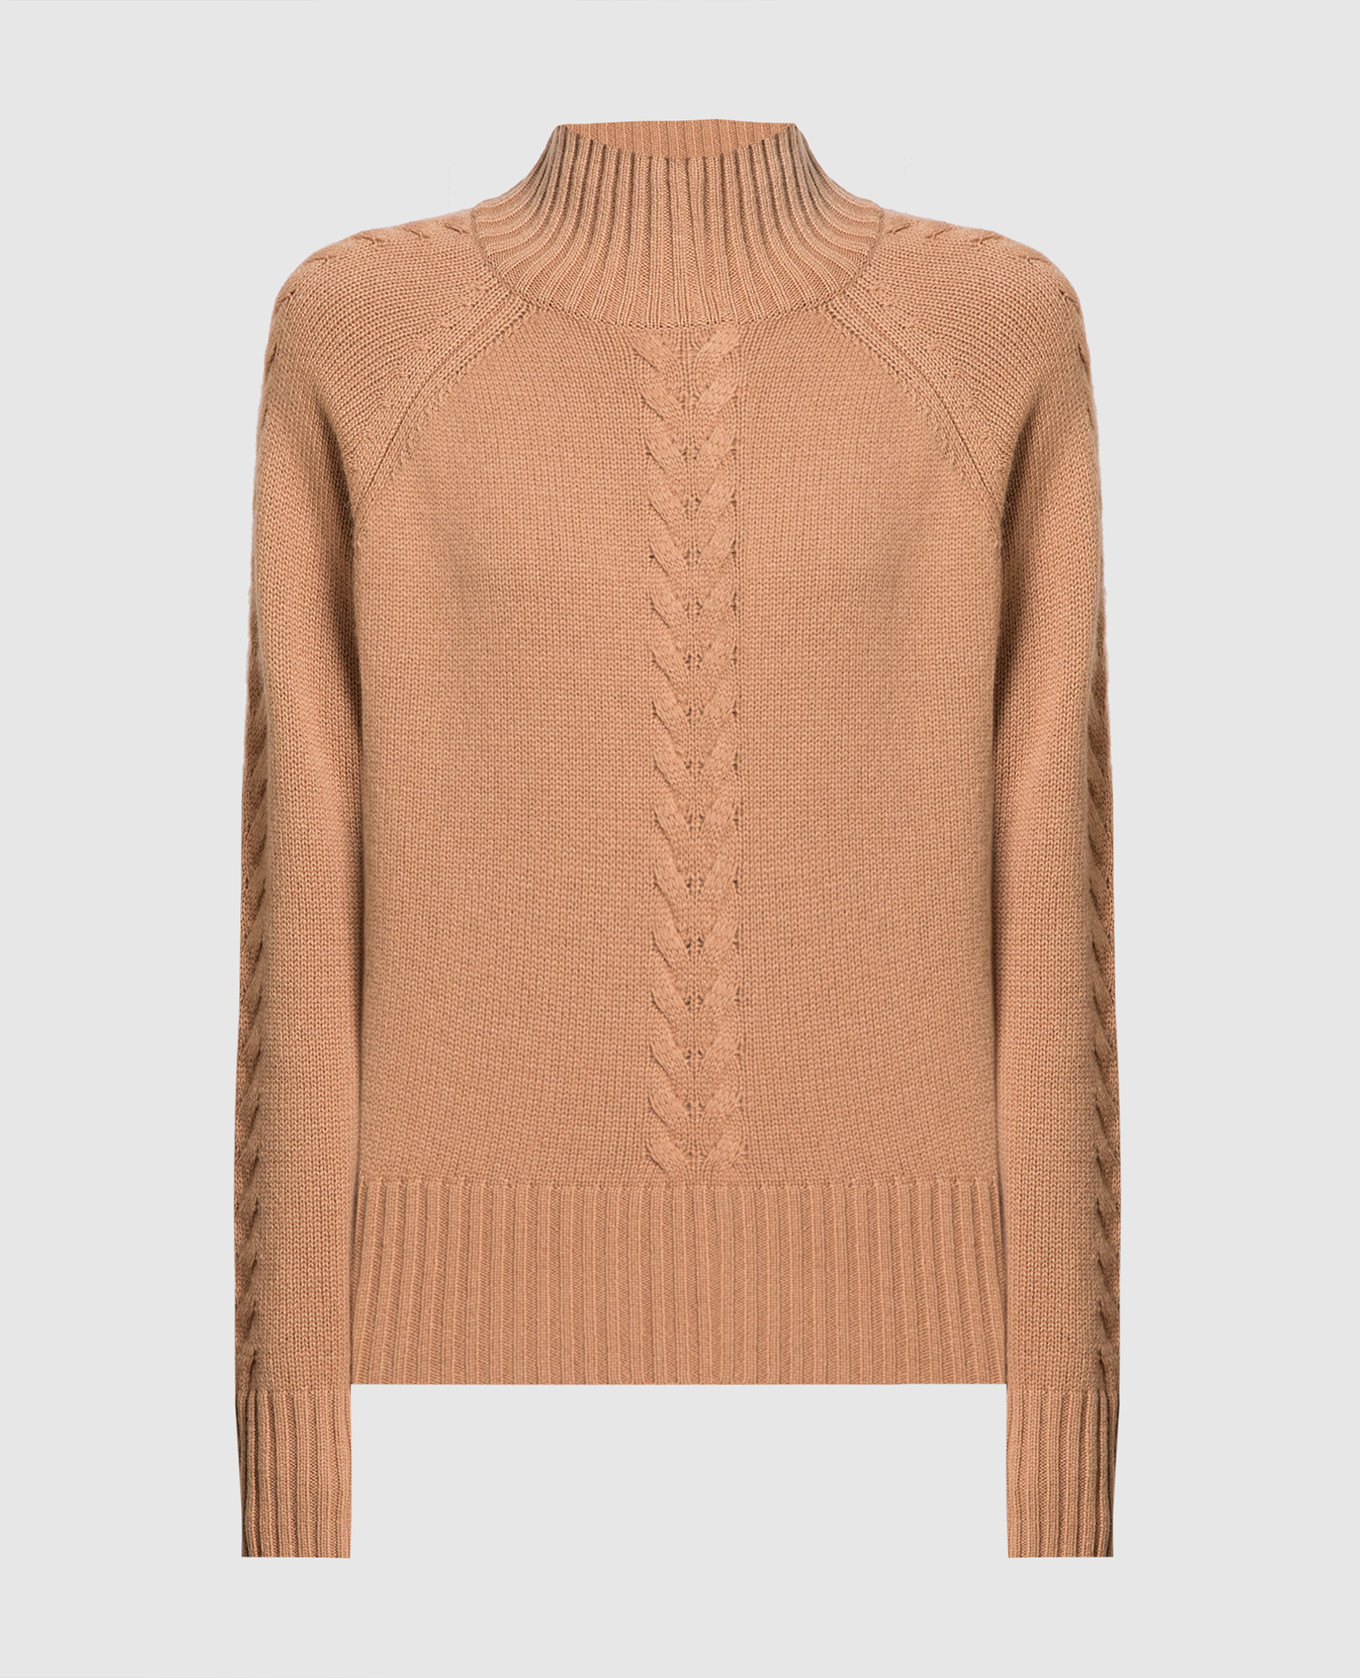 Brown sweater in wool and cashmere with a textured pattern